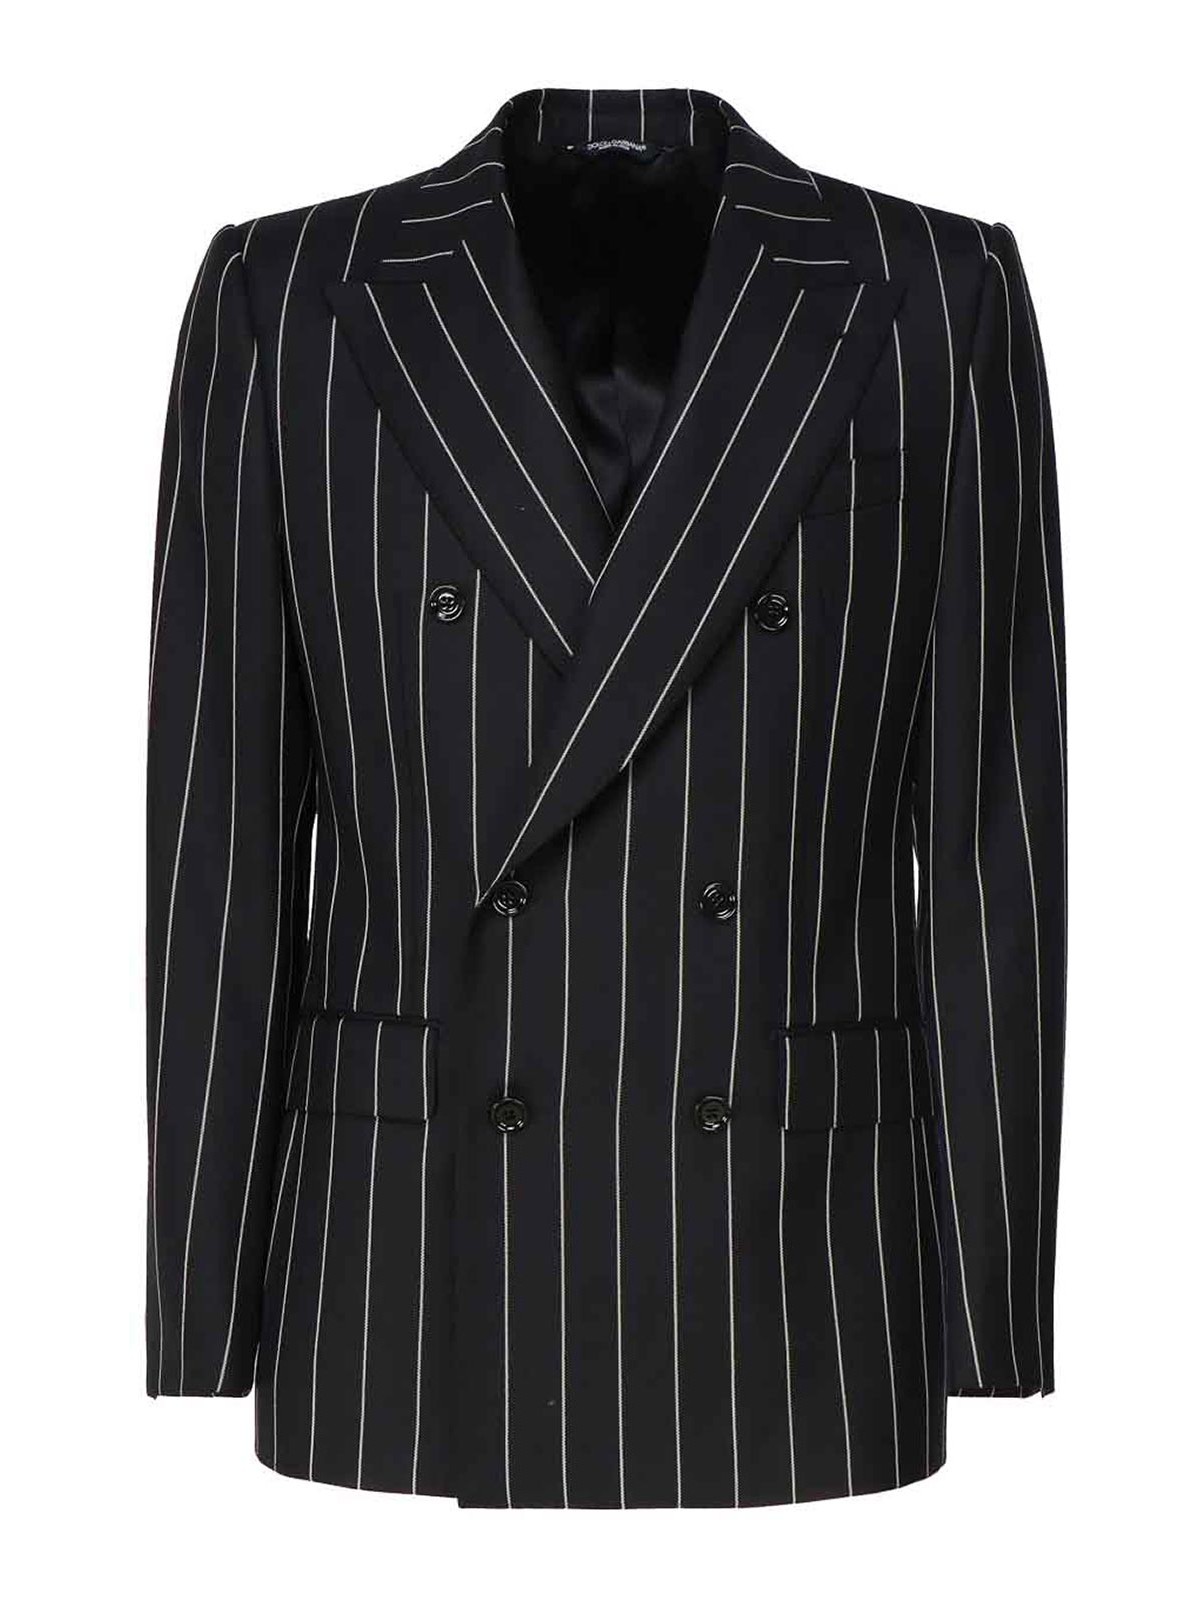 Dolce & Gabbana Double-breasted Jacket In Black